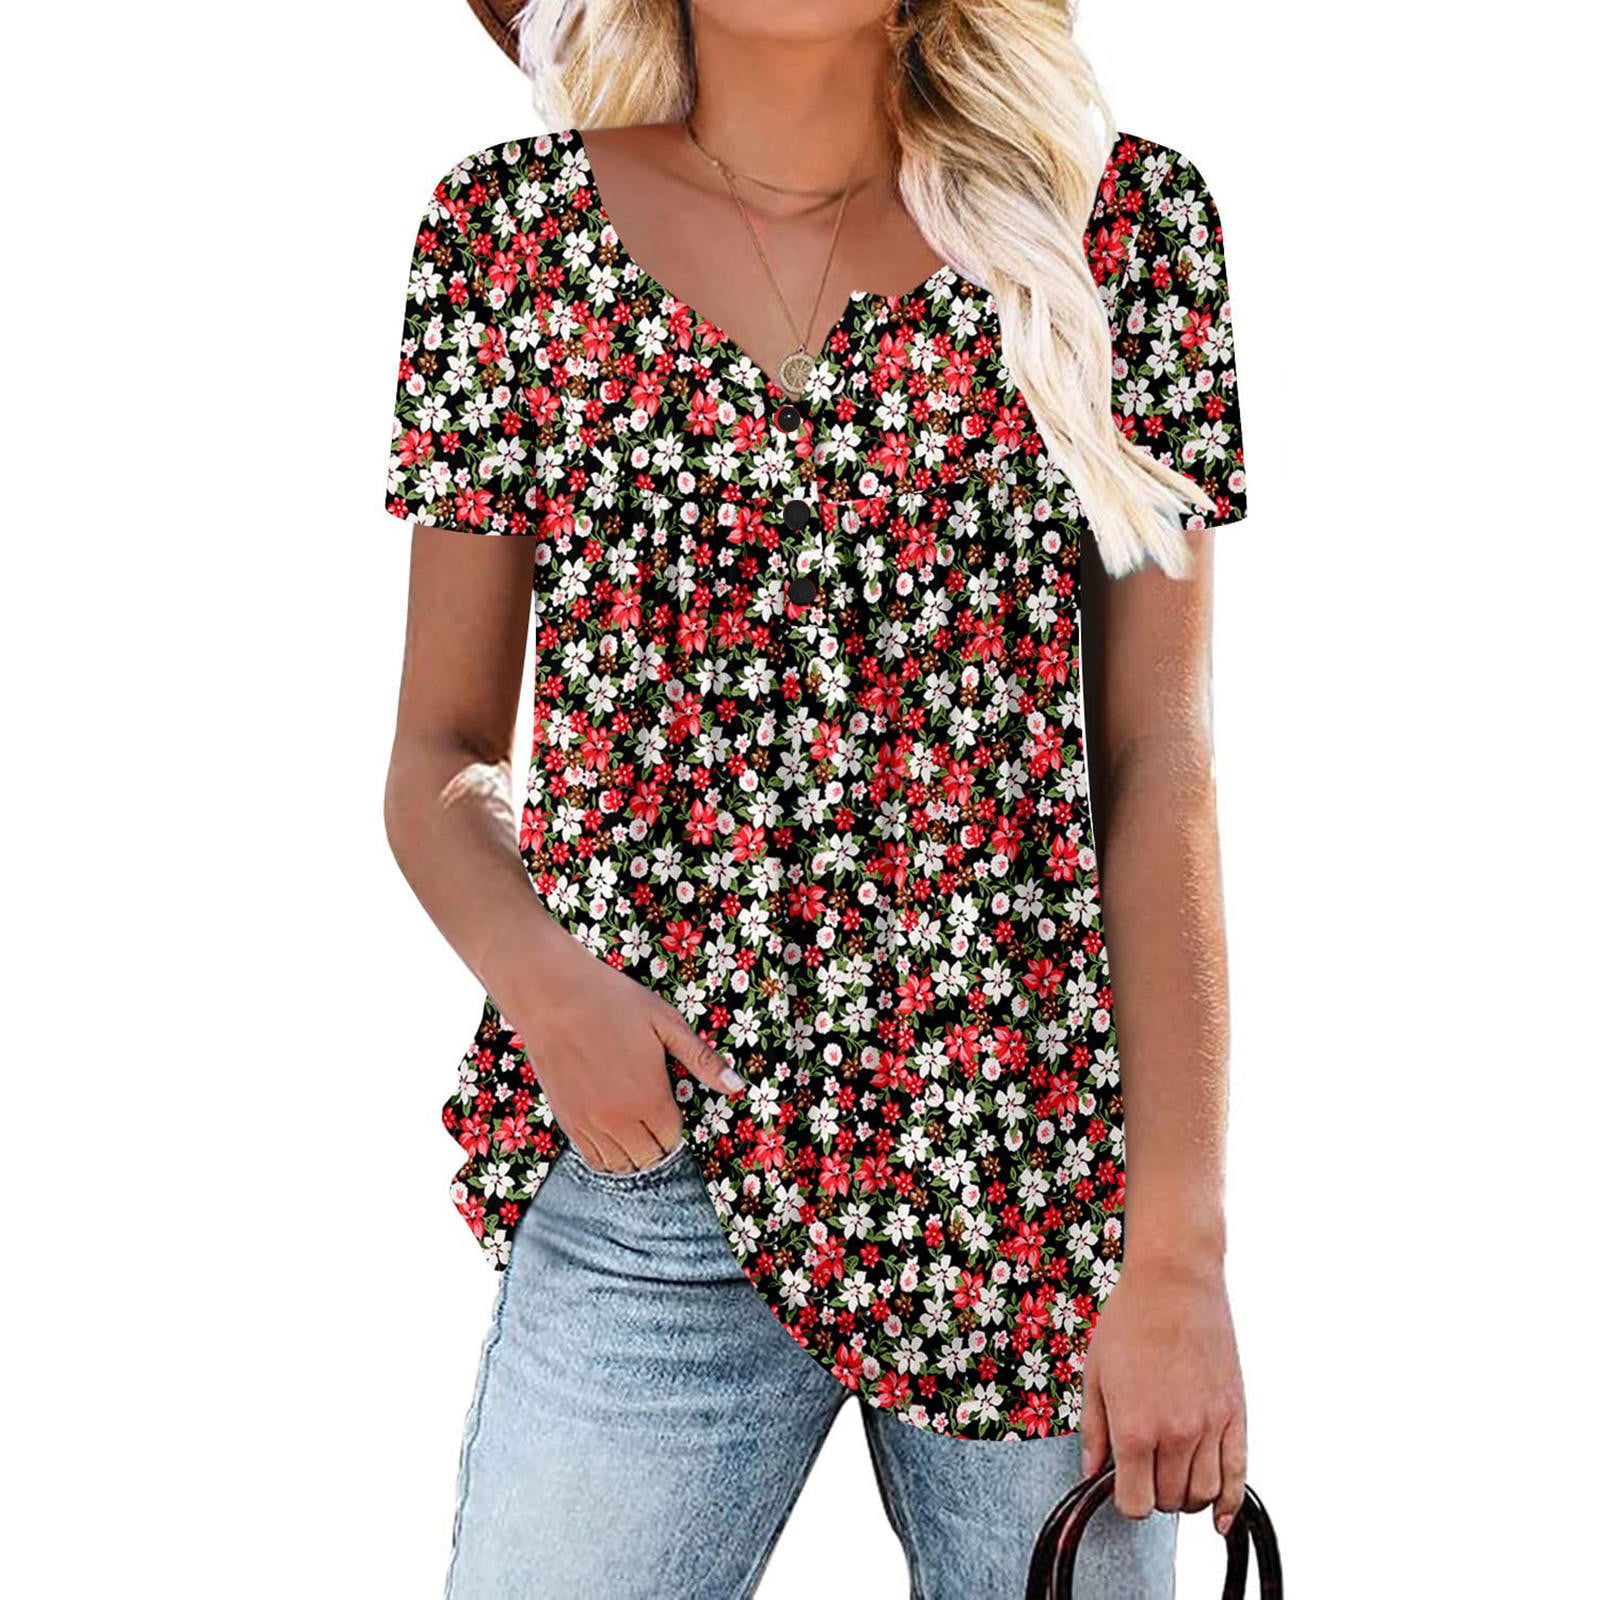 Womens Shirts Dressy Casual Cute Plus Size Tops for Women Gradient Shoulder Shirt V-Neck Buttons Tees Pleasted Loose Short Sleeve Pullover Blusas Casuales de Mujer Bonitas - Walmart.com